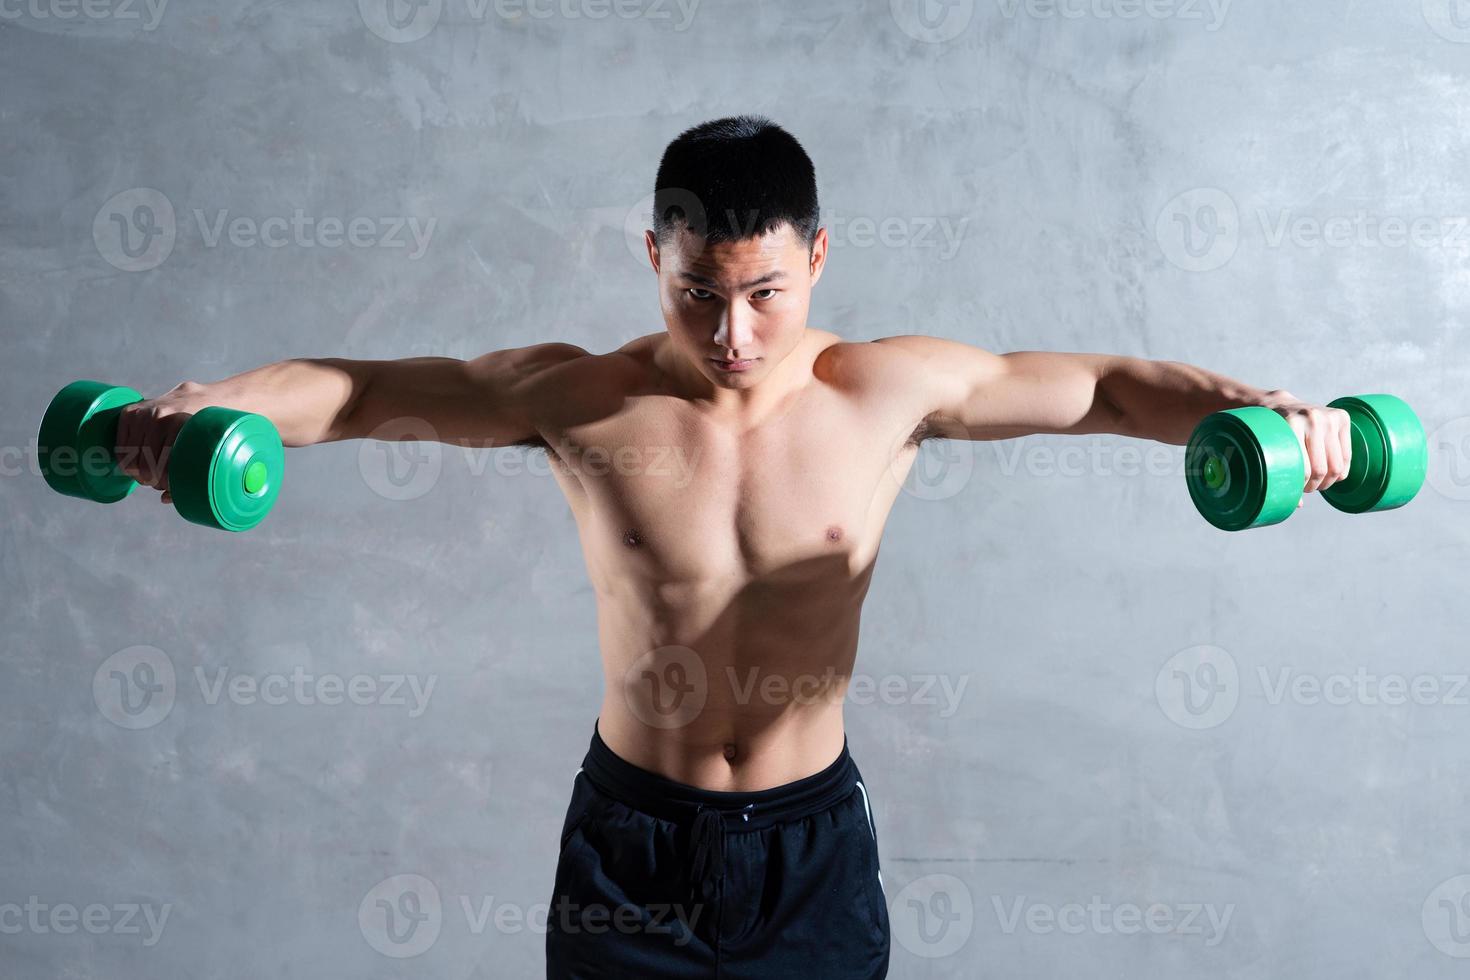 Muscular Asian man posing on gray background photo